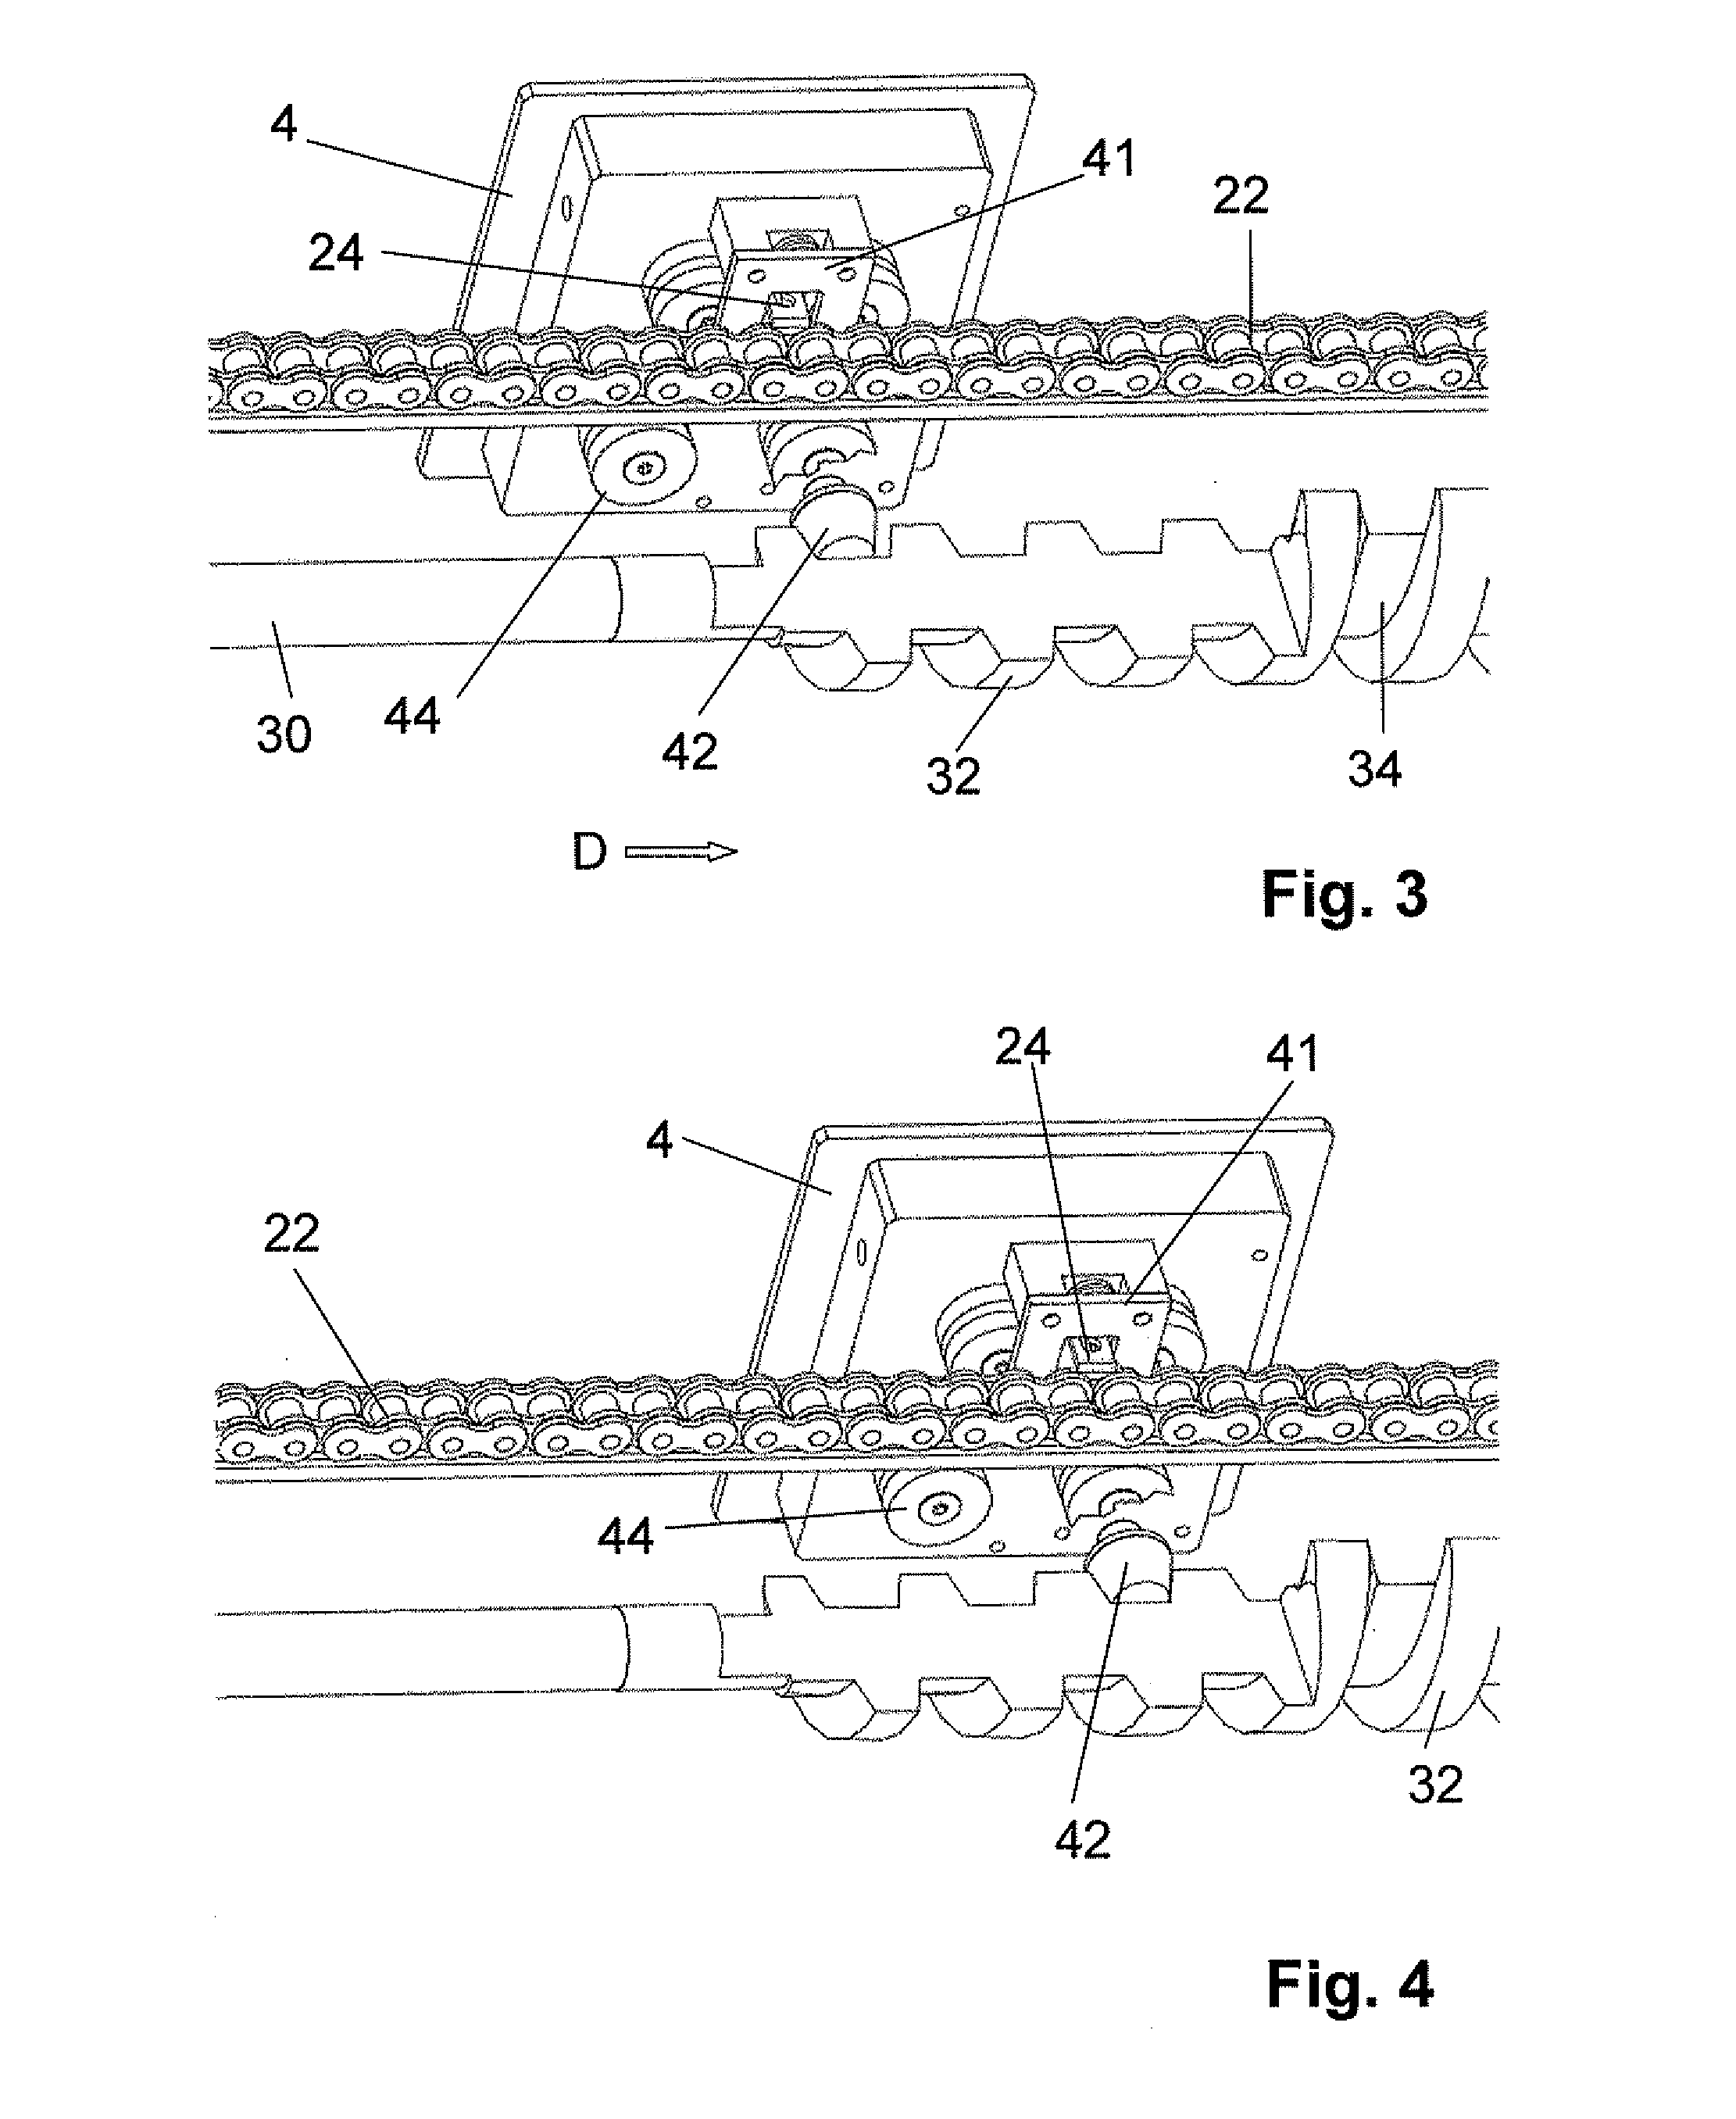 Device for treatment of articles comprising overlapping driving devices